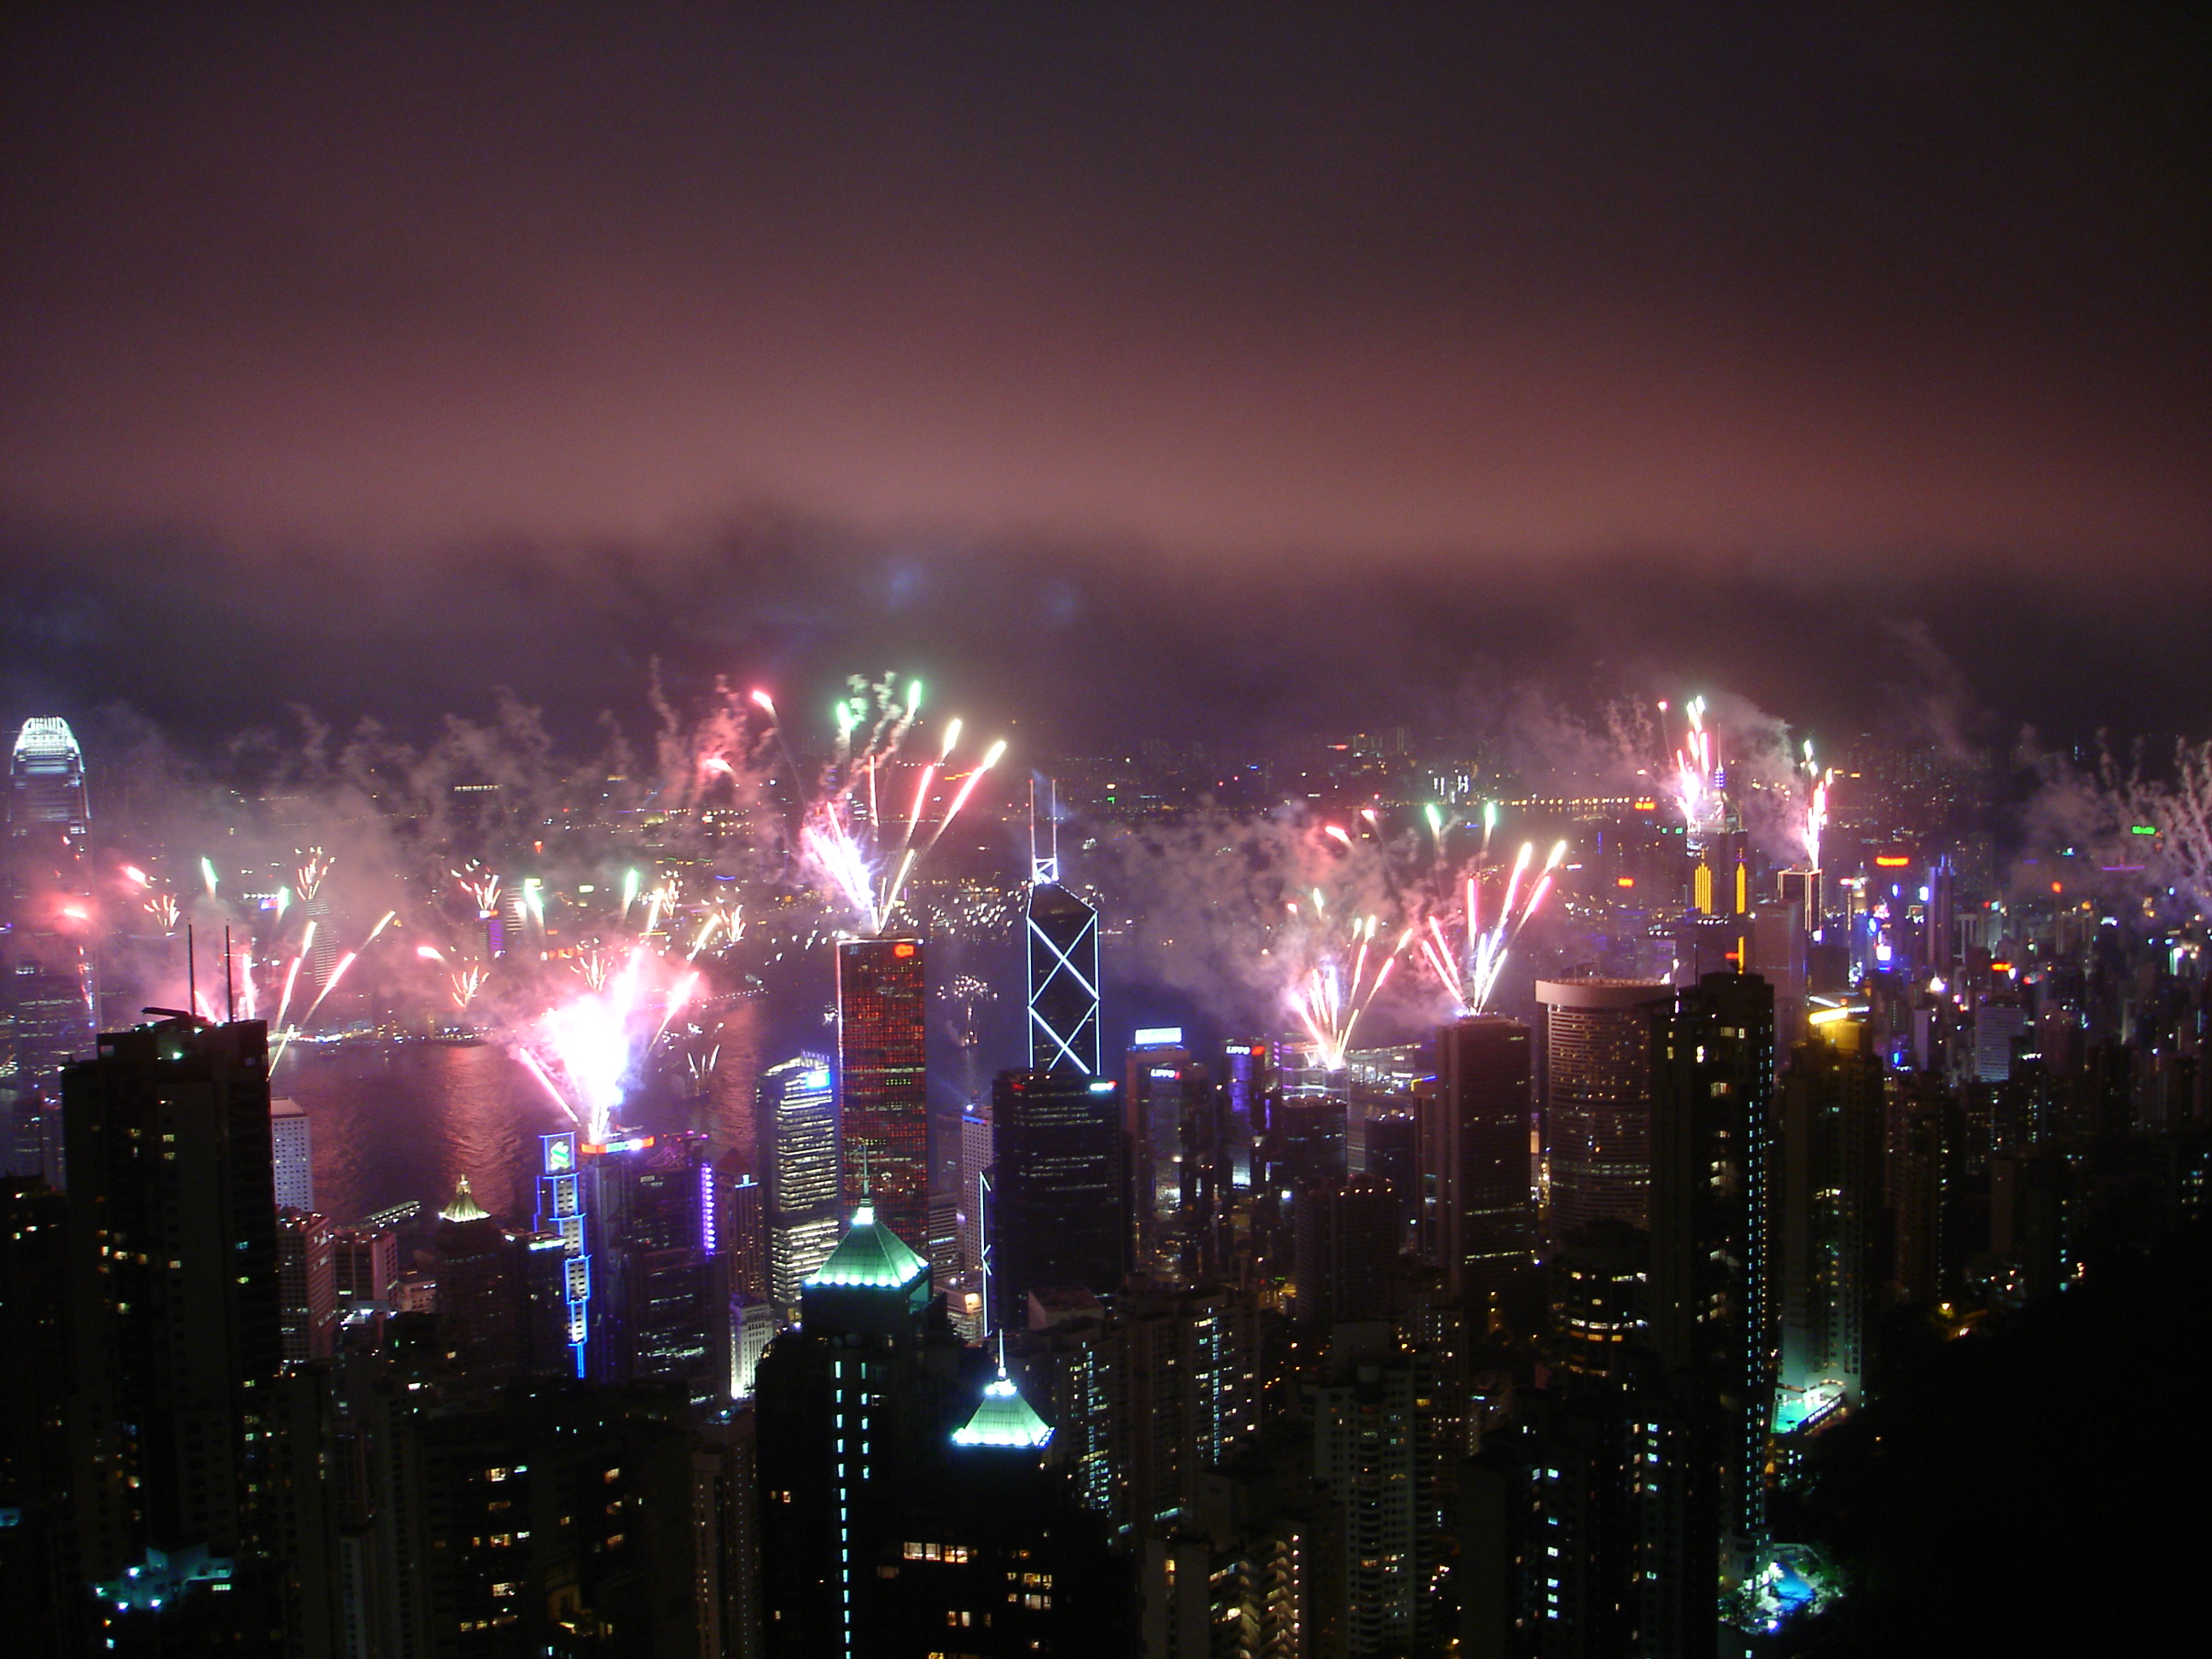 NYE fireworks in HK  Picture wikicommons (By tksteven – 自拍, CC BY-SA 2.5) 